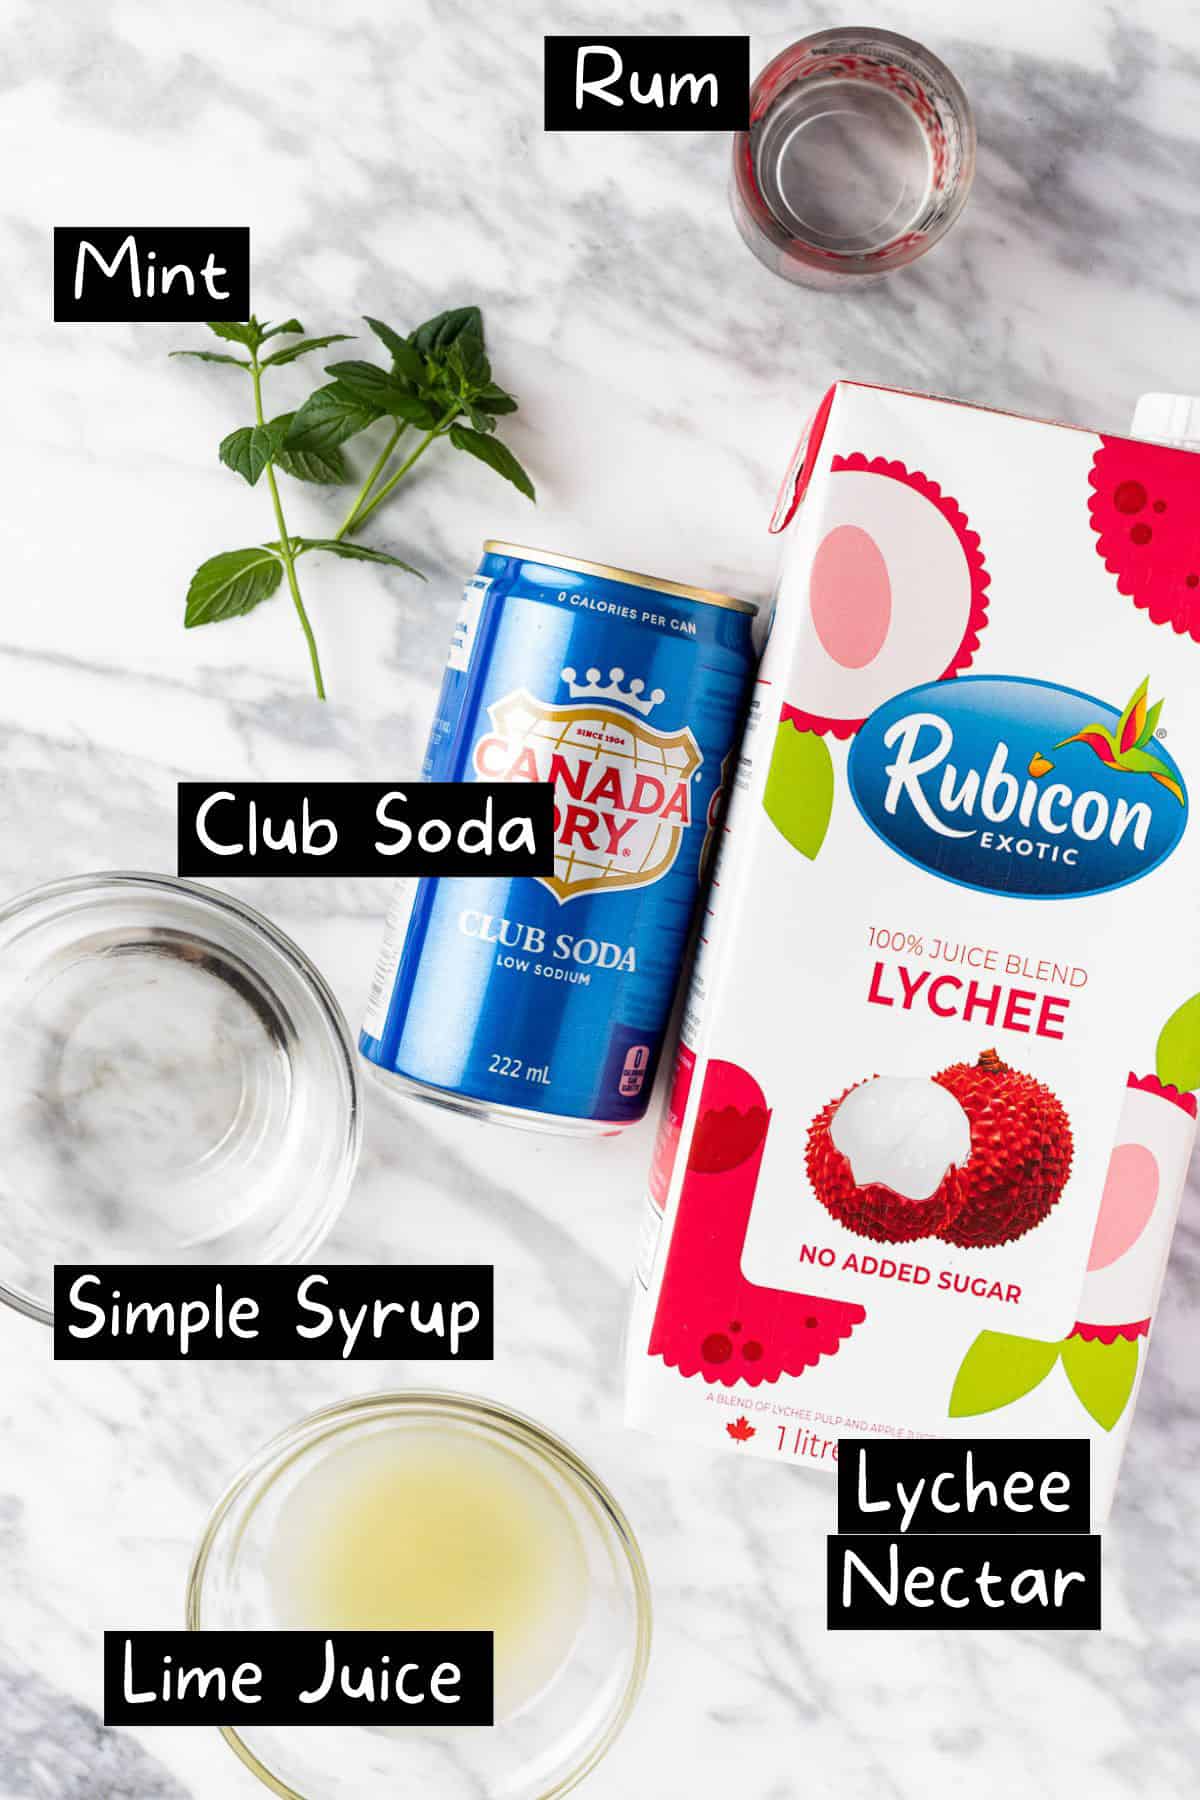 The ingredients needed to make the lychee mojito.